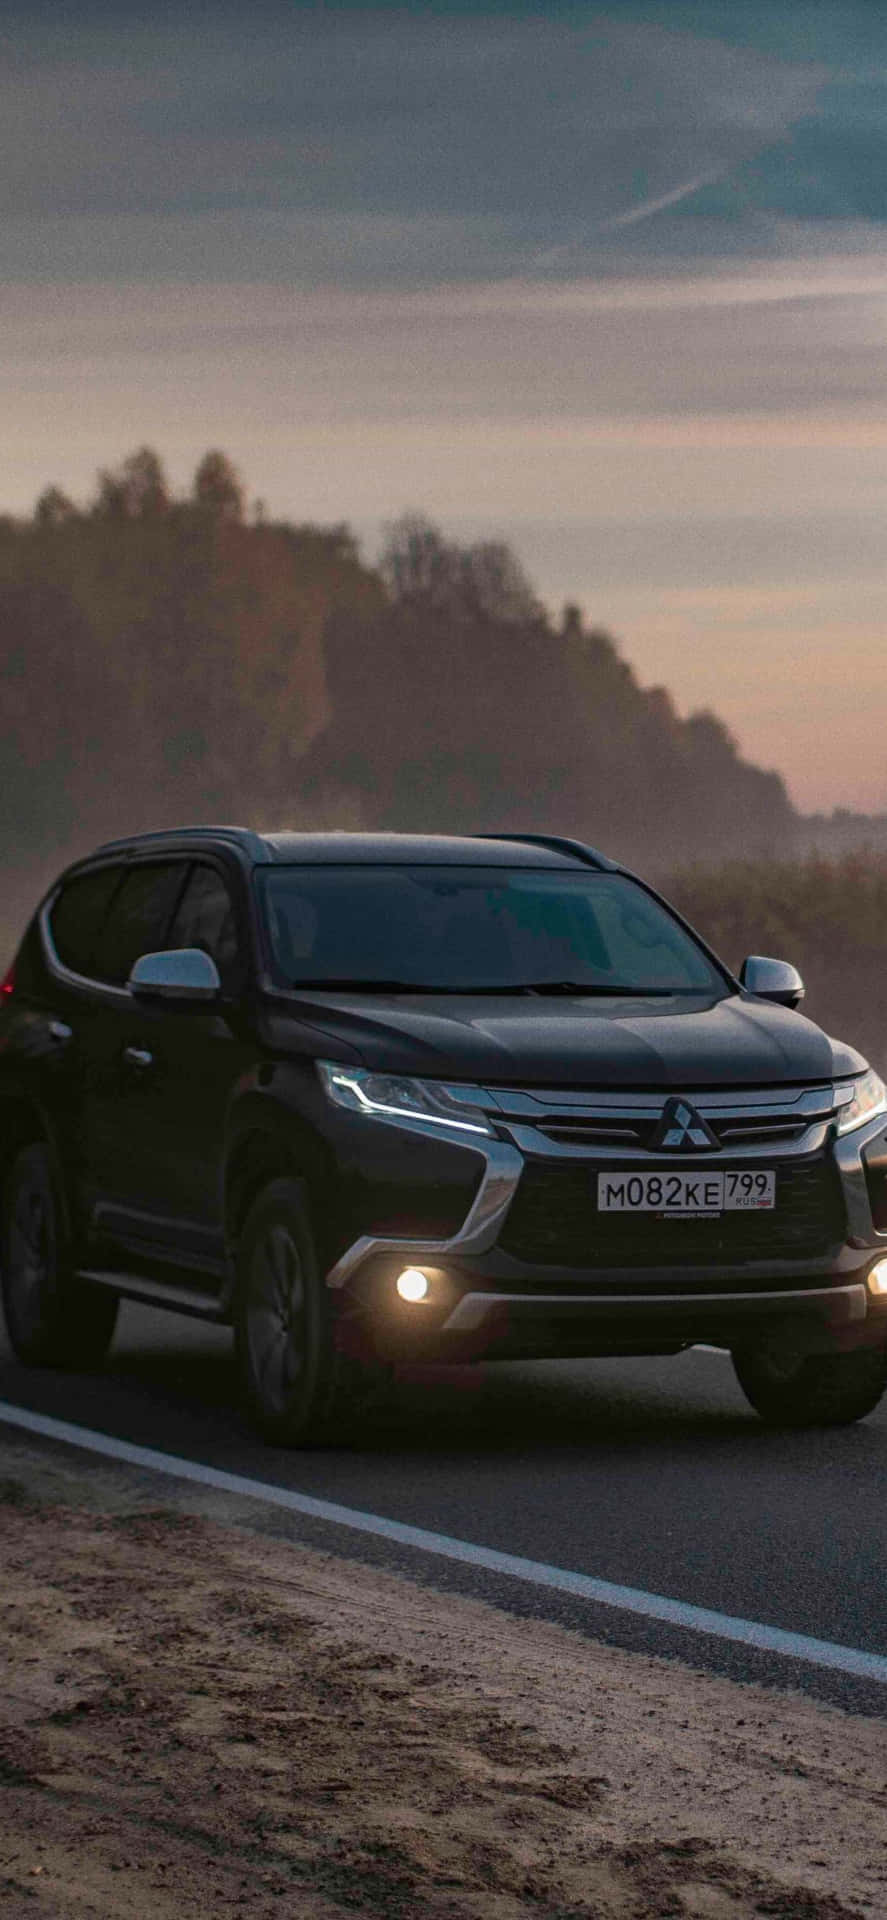 The 2019 Mitsubishi Outlander Is Driving Down A Country Road Wallpaper